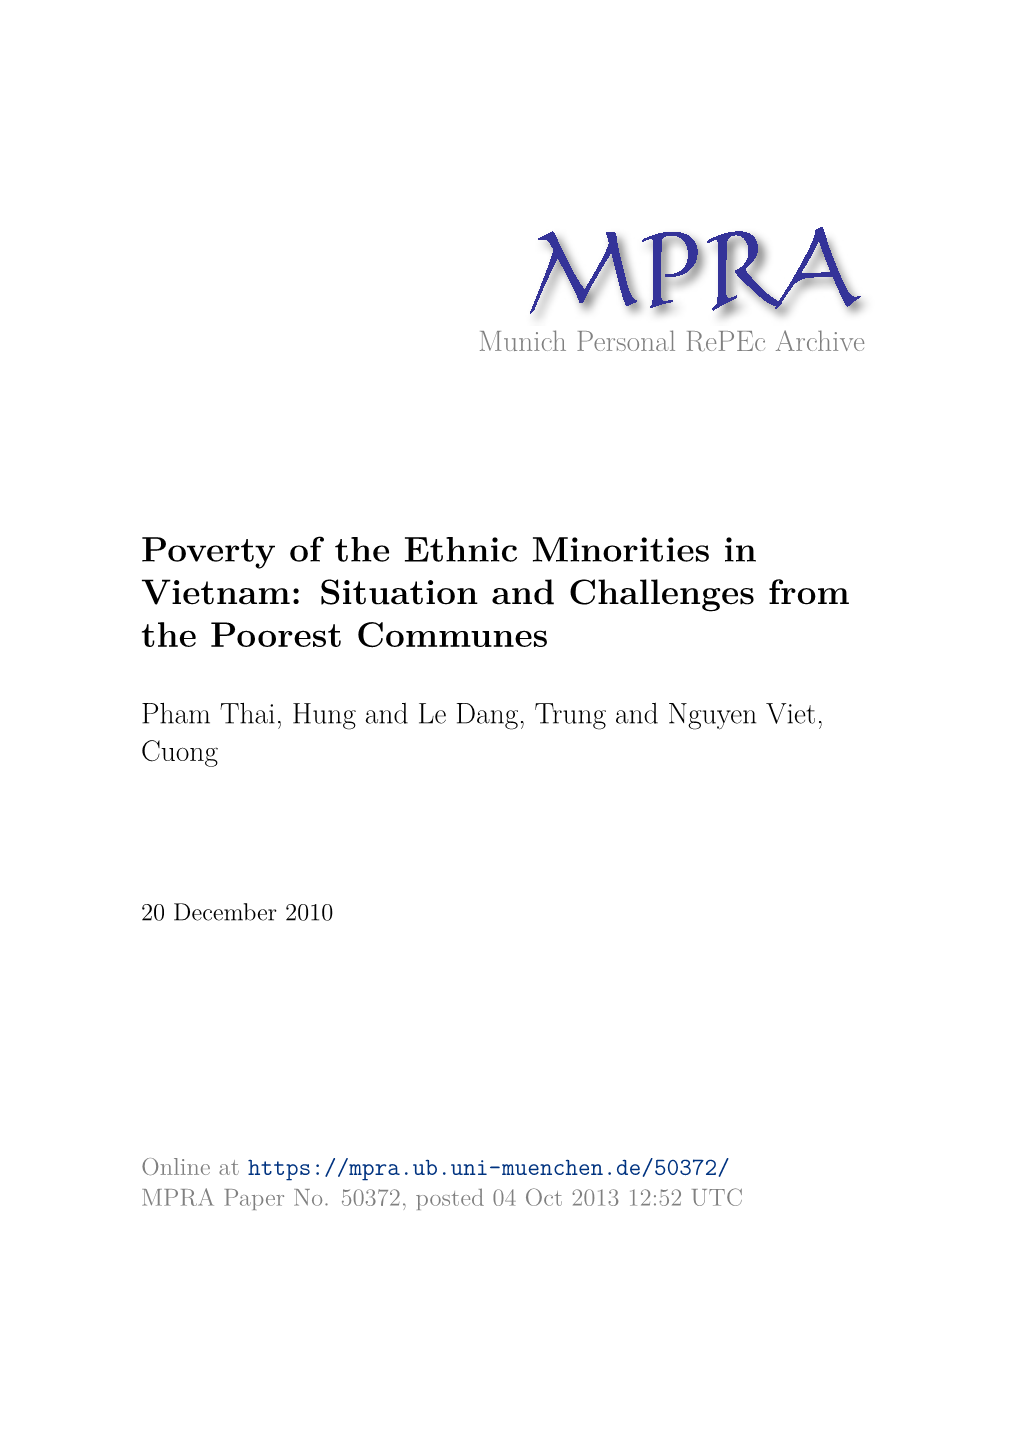 Poverty of the Ethnic Minorities in Vietnam: Situation and Challenges from the Poorest Communes